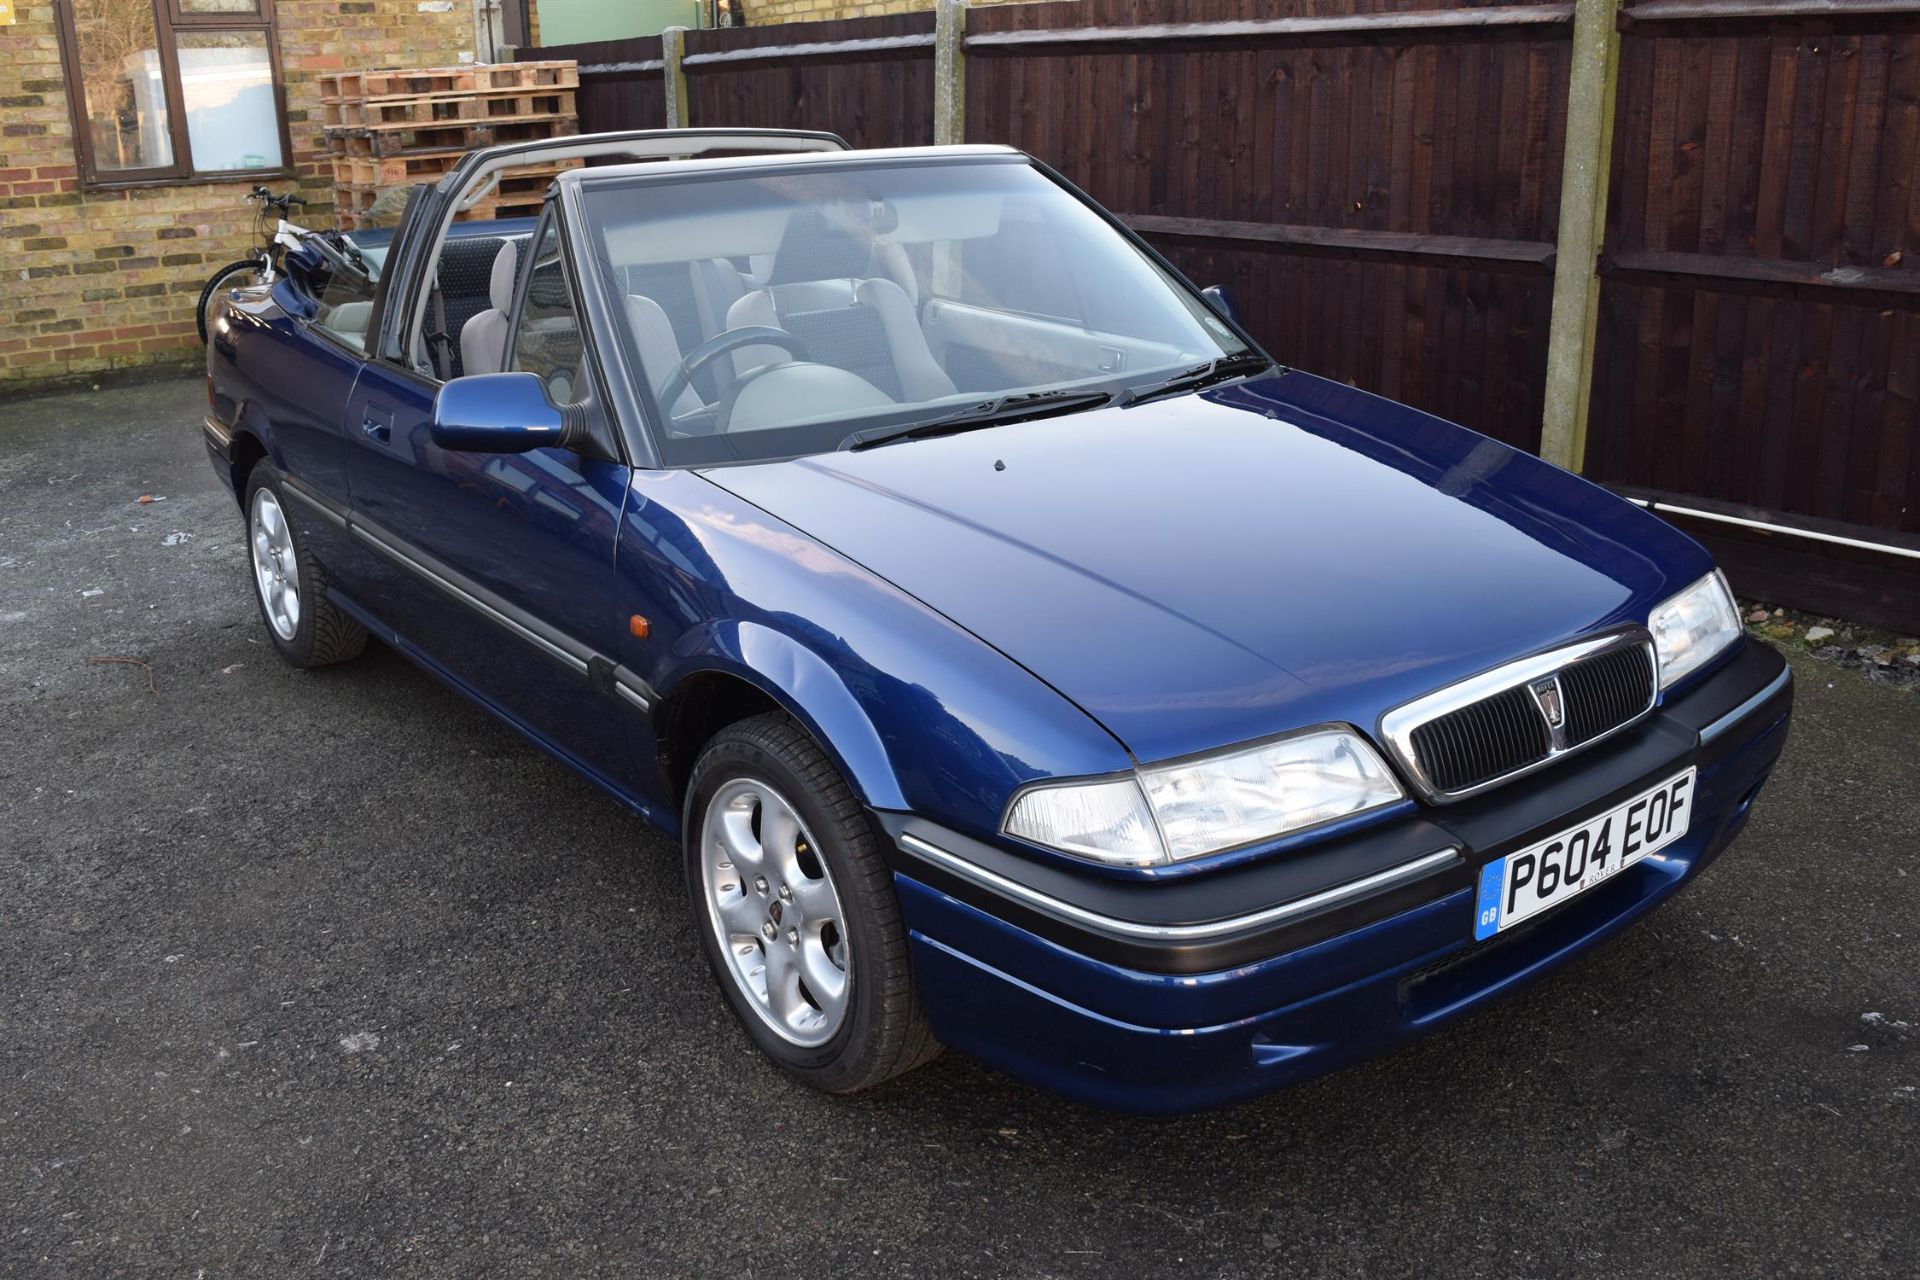 1996 Rover 216 Cabriolet - Image 8 of 25